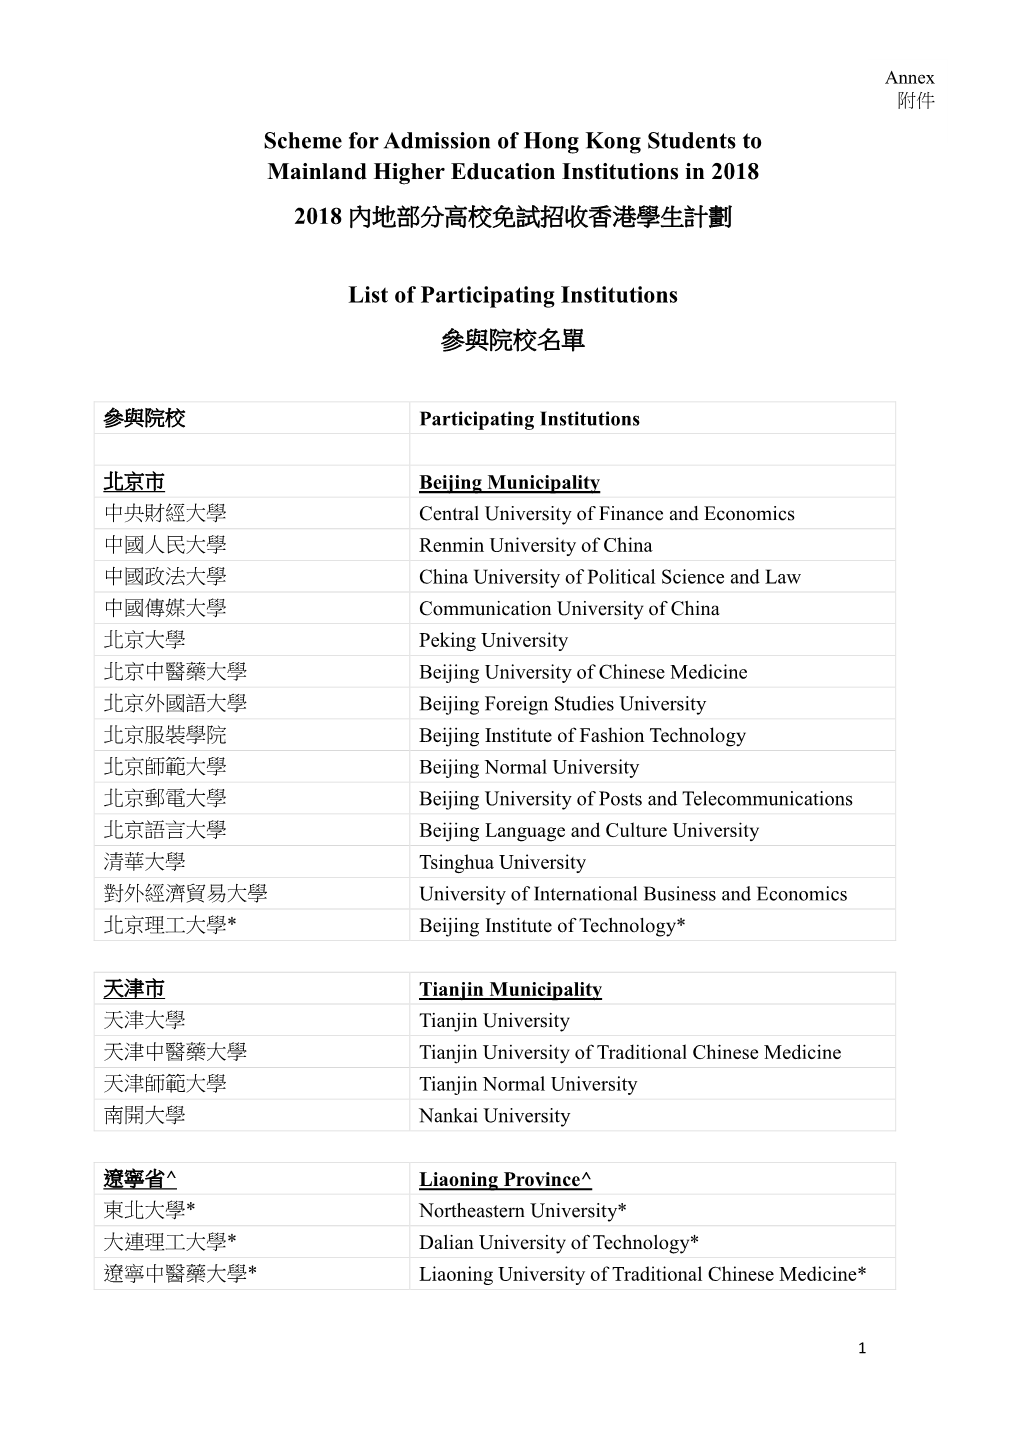 Scheme for Admission of Hong Kong Students to Mainland Higher Education Institutions in 2018 2018 內地部分高校免試招收香港學生計劃